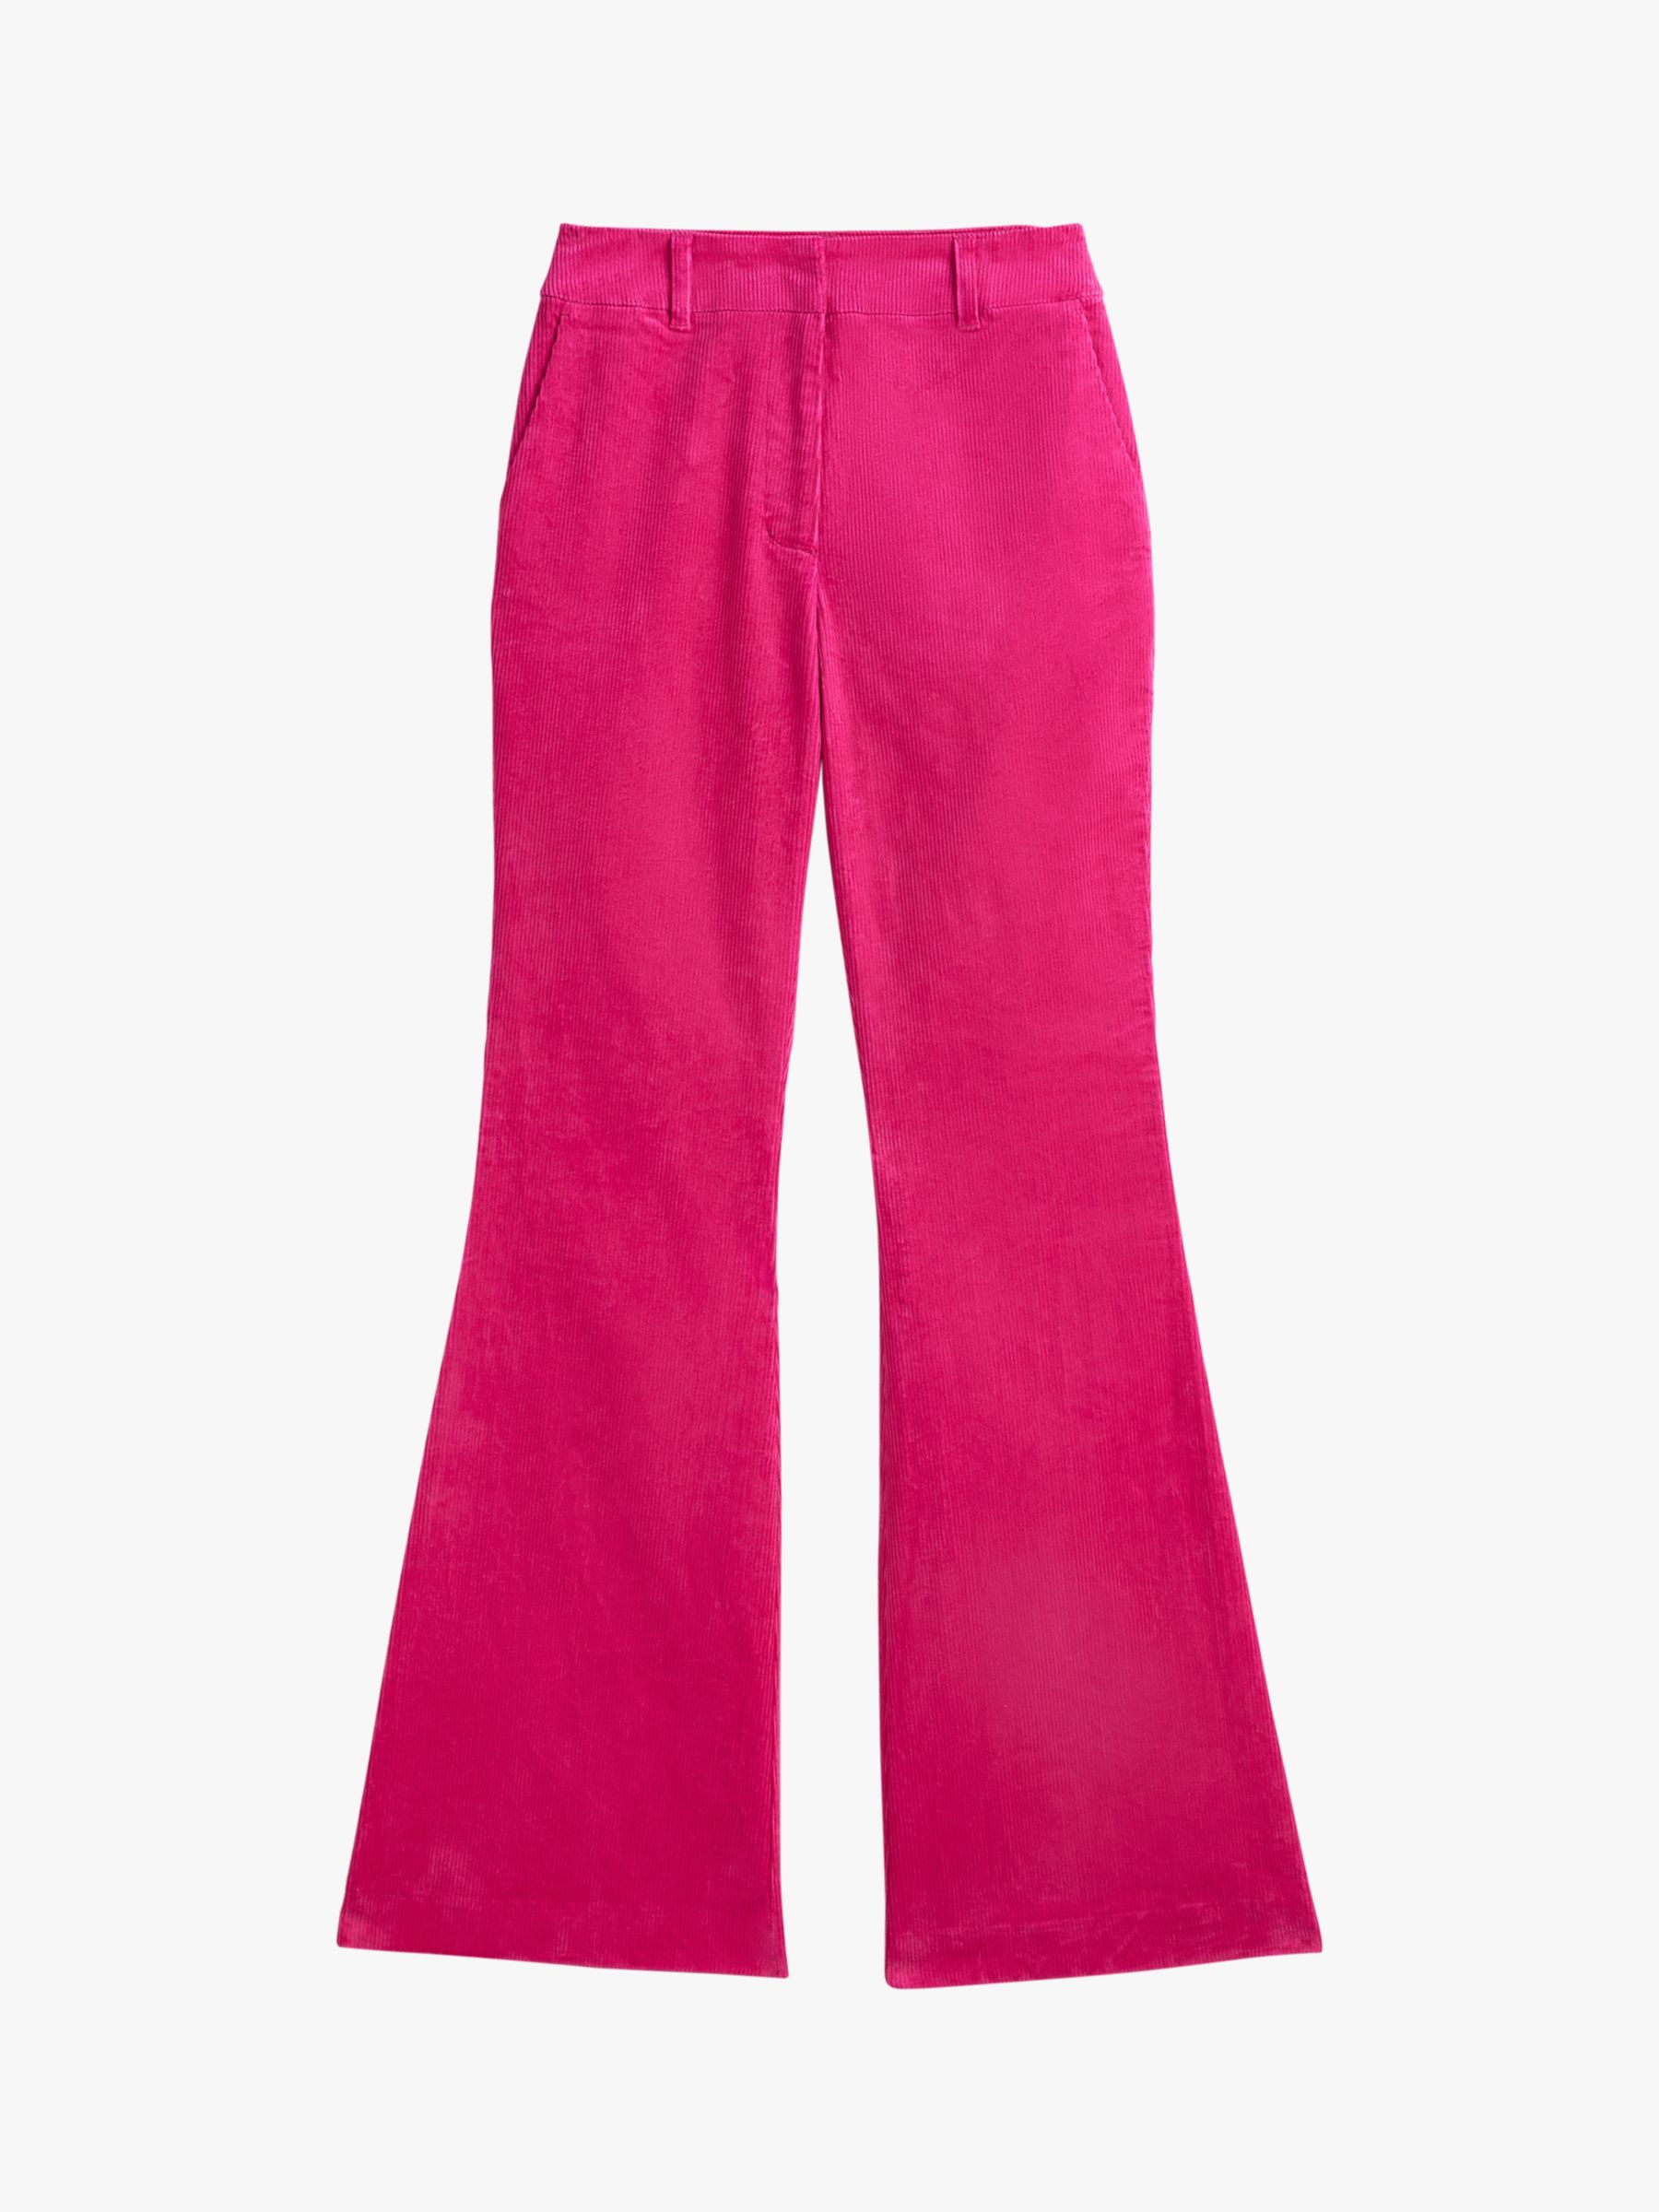 Boden Fitted Flared Trousers, Wild Watermelon Pink, 8